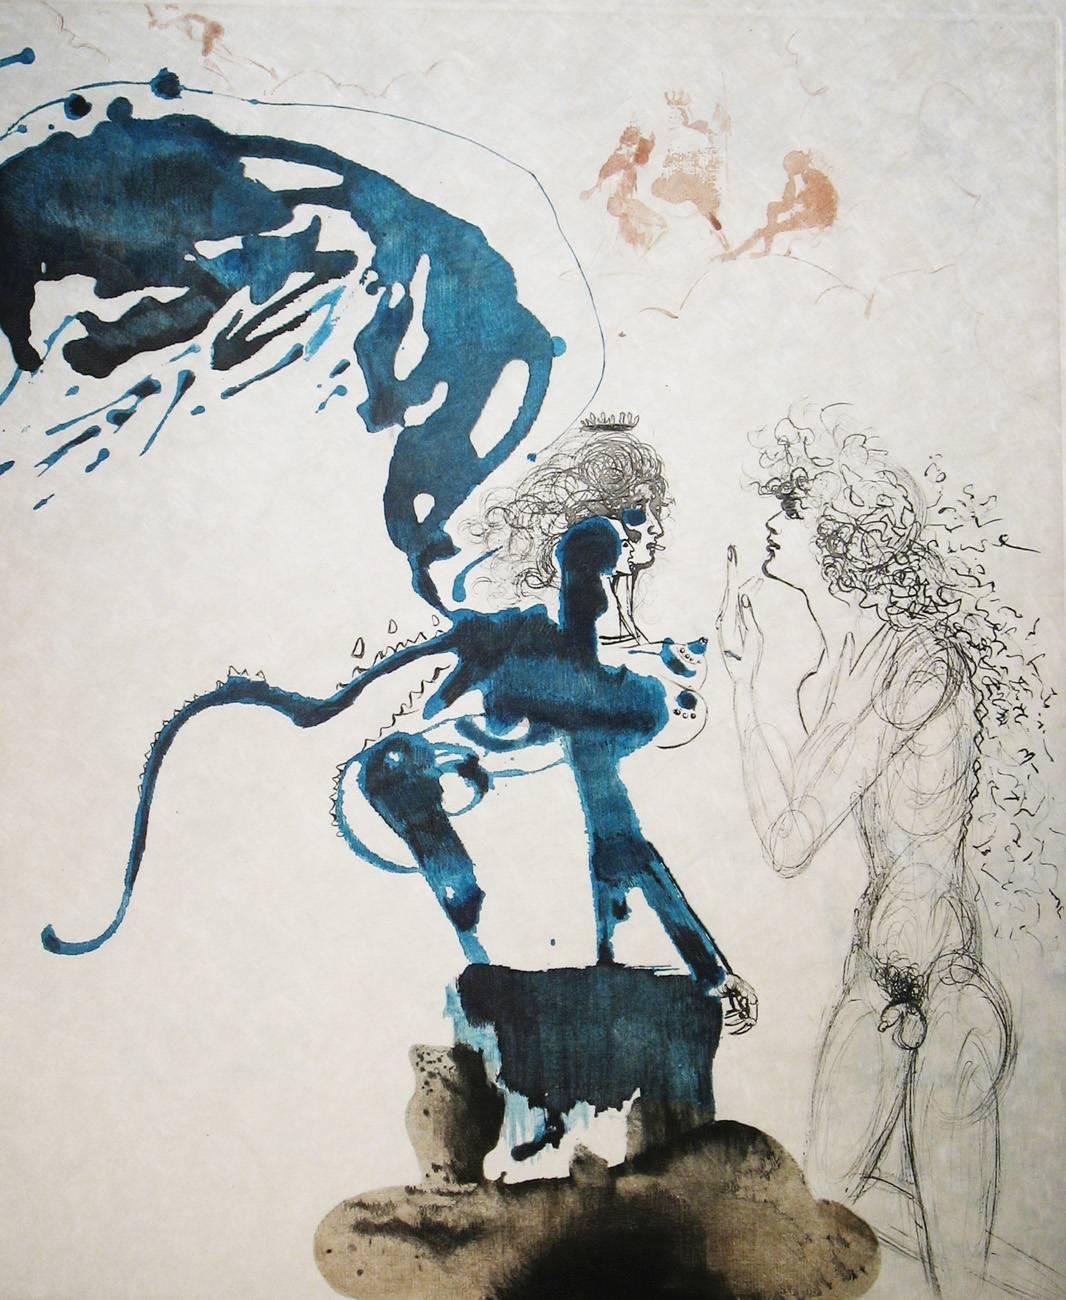 Edipus and the Sphinx - Print by Salvador Dalí